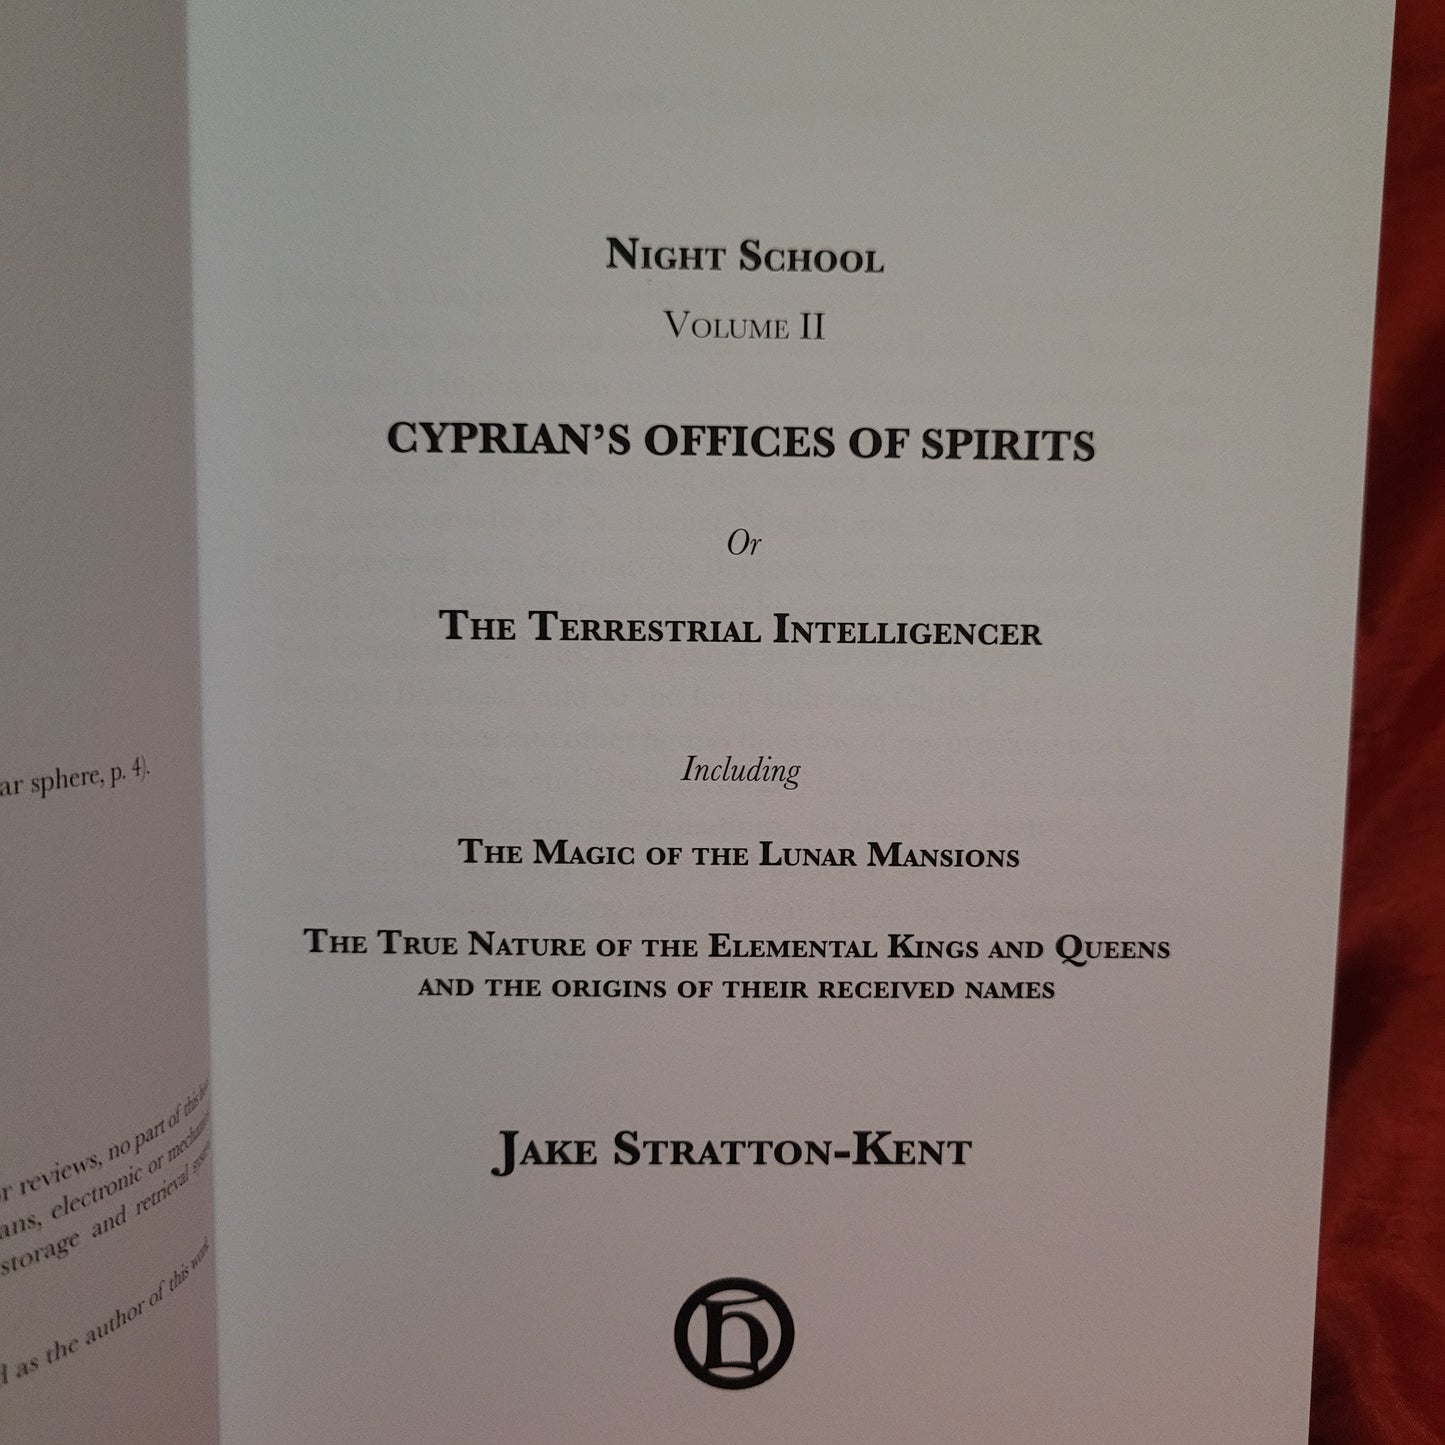 Cyprian's Office of Spirits: Night School II by Jake Stratton Kent (Hadean Press) Limited Edition Hardcover